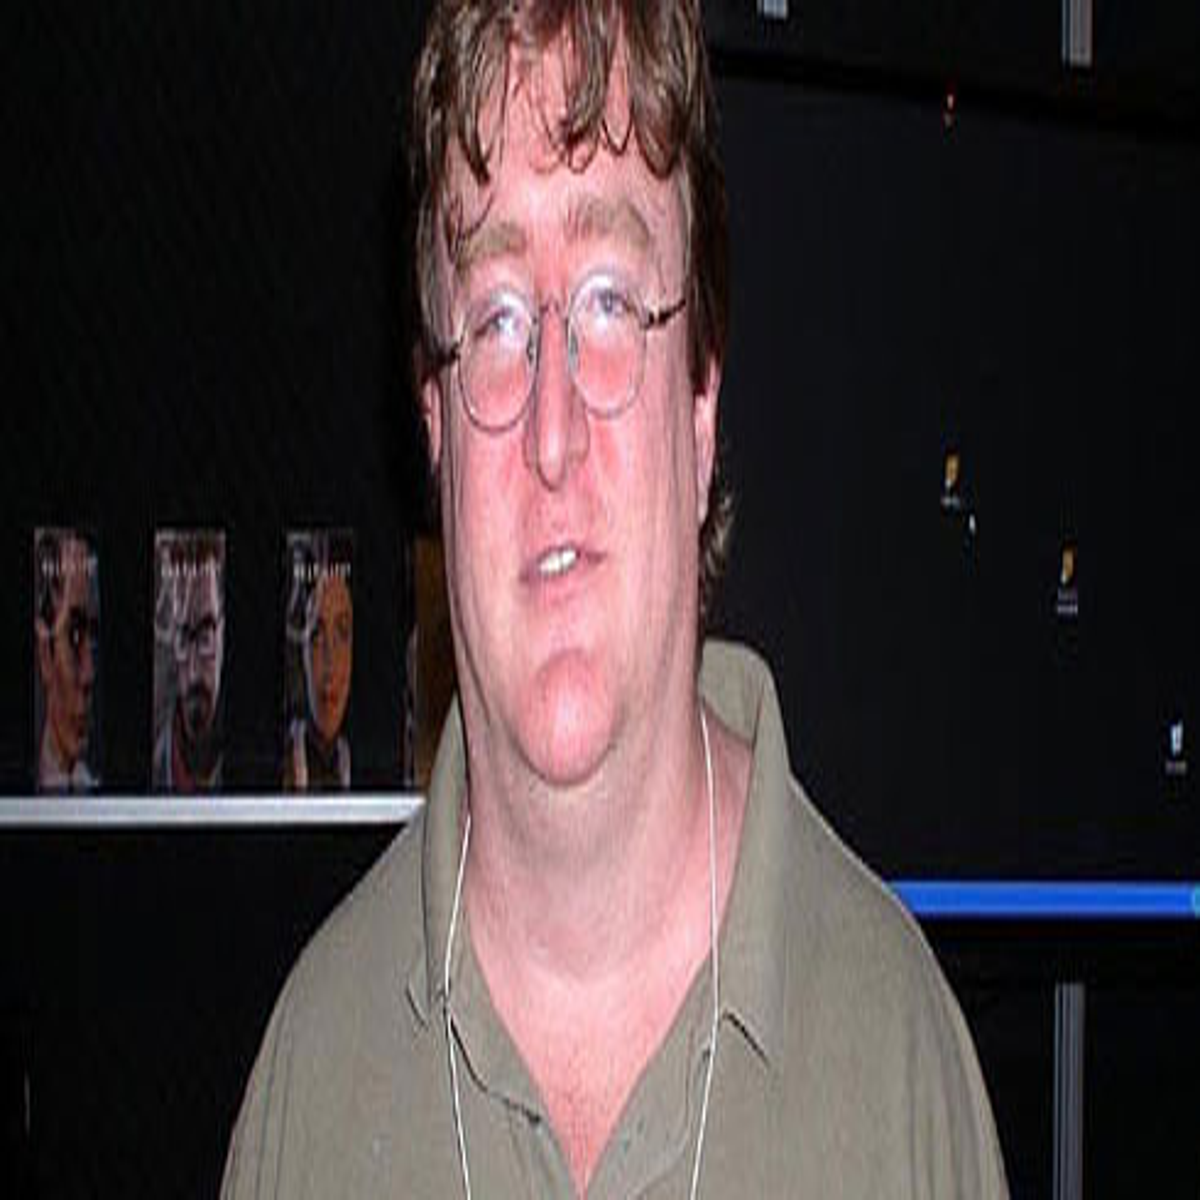 Exclusive Gabe Newell Interview at Valve HQ